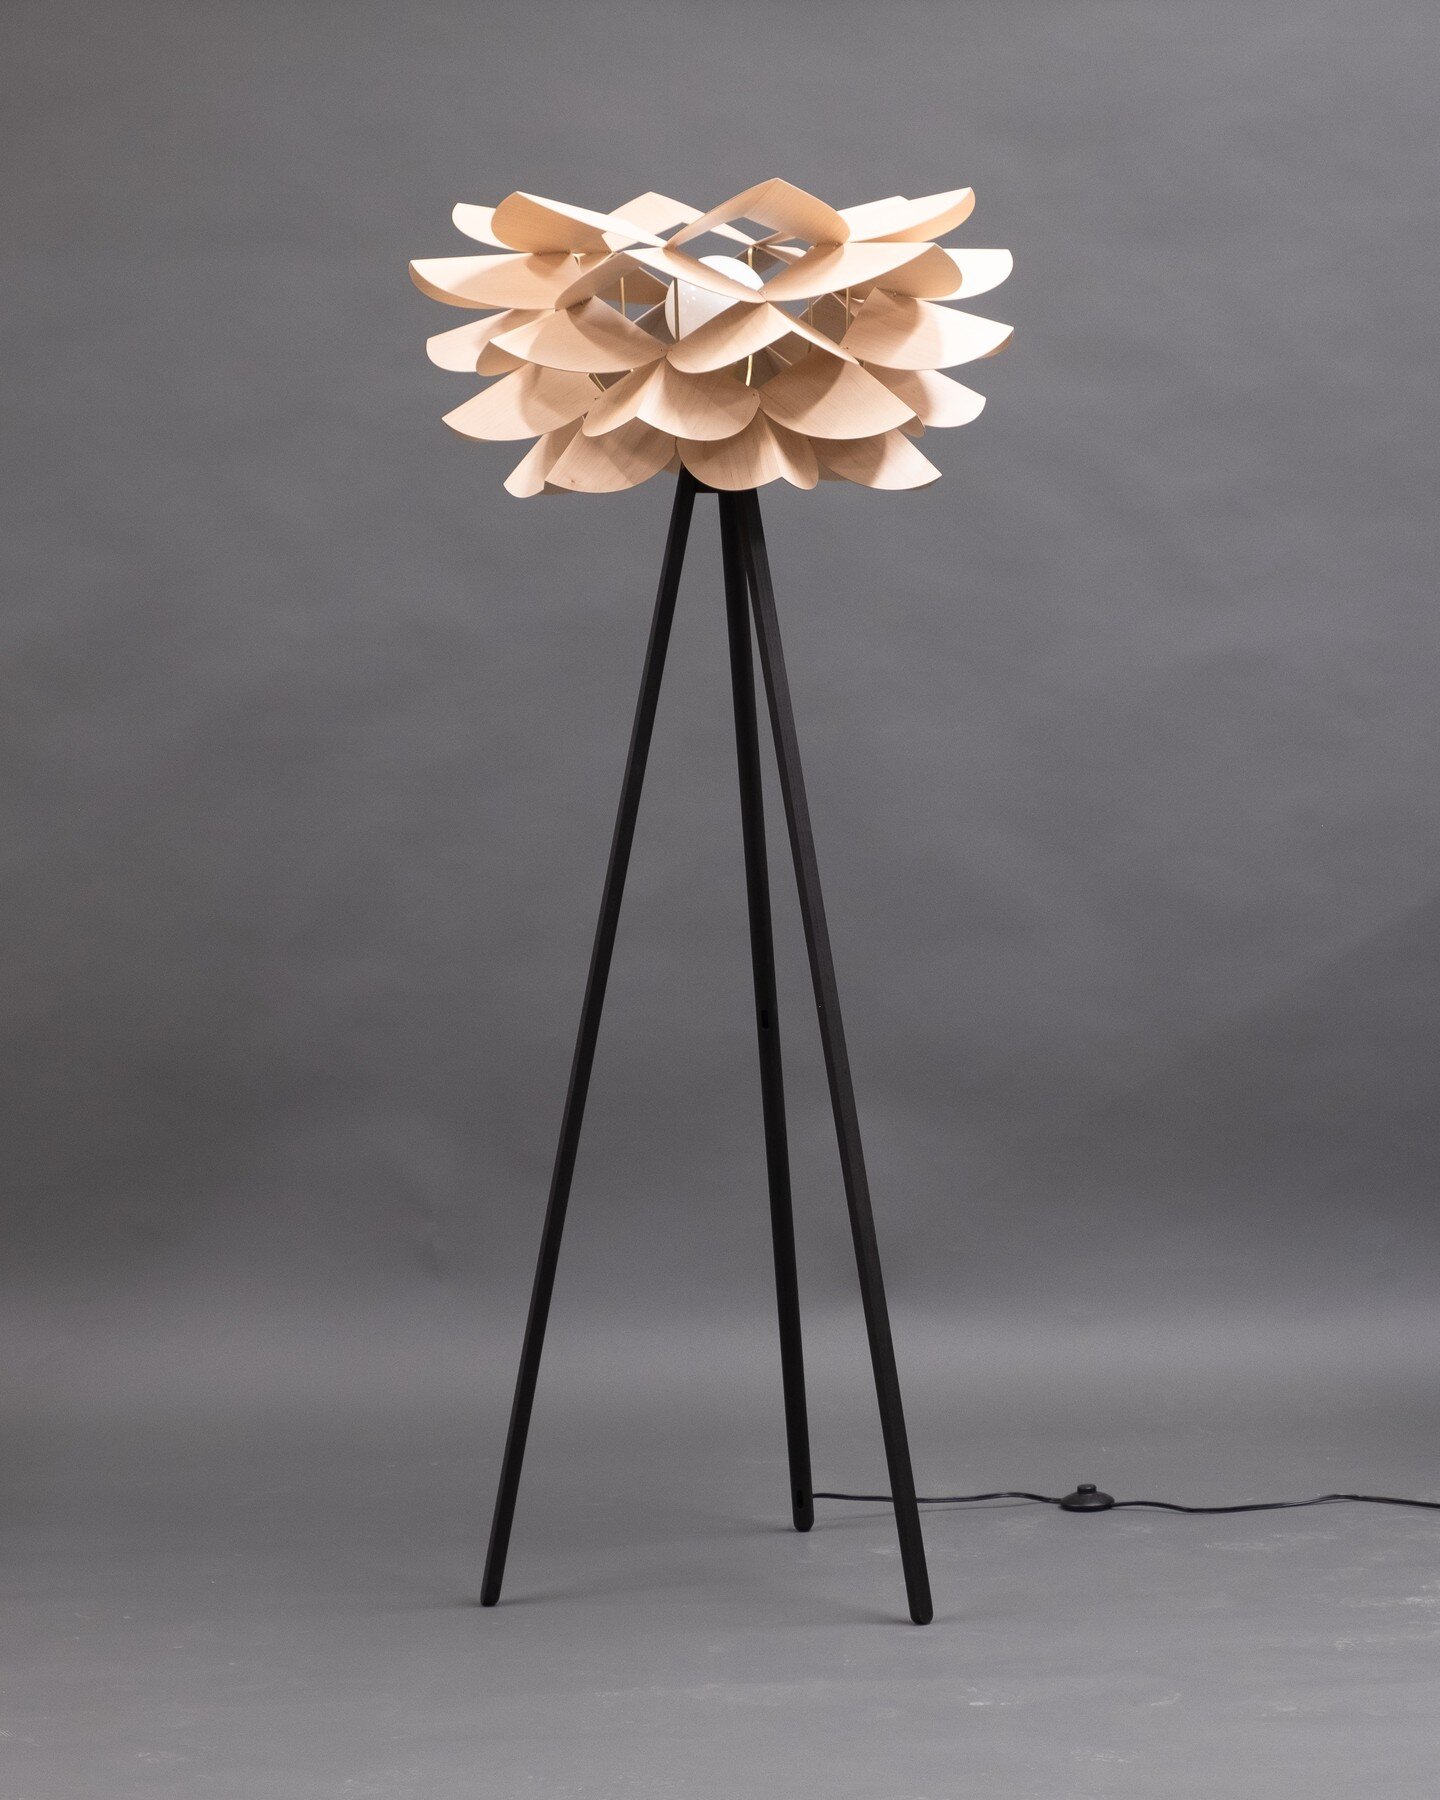 Last year I made an experimental pendant lamp with a shade made from maple veneer 'petals'. A few weeks ago I was asked if it could be adapted as a floor lamp, and that set me on an obsessive quest to make it work. This is the first prototype...there